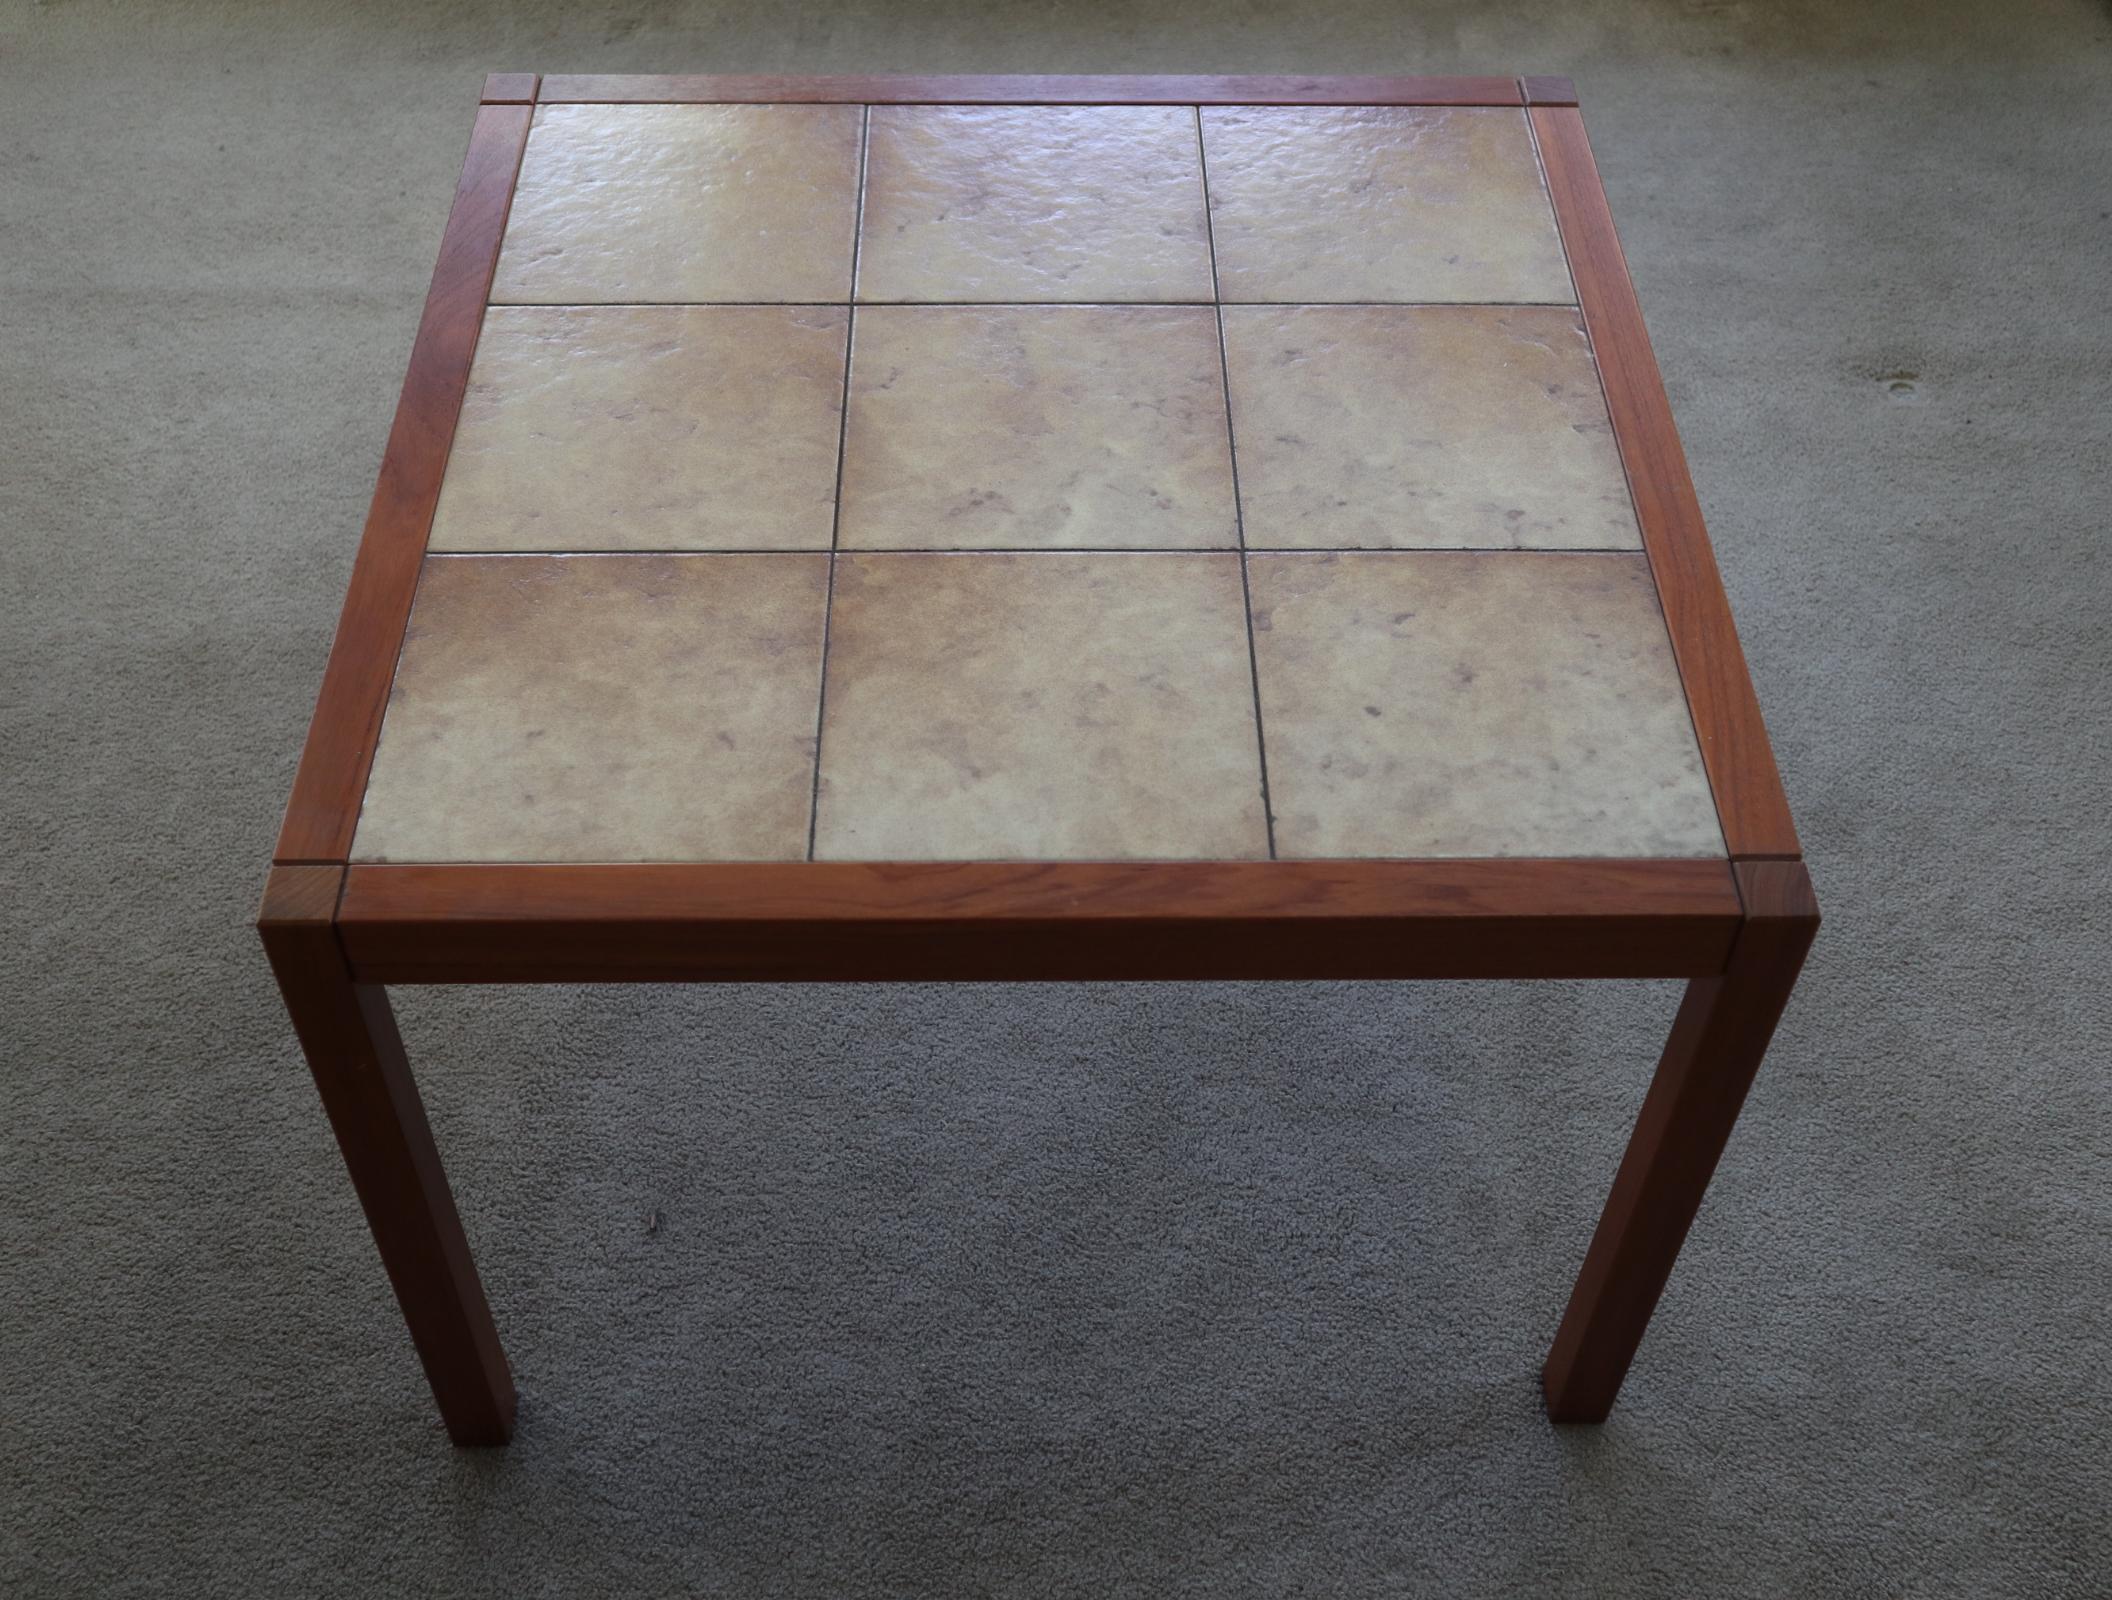 Lovely elegant coffee table. Square teak frame and legs with neutral tiles. Teak even in color and tile has no breaks or damage. Normal wear. Legs unscrew for safe transport. Stamped Denmark to underside of table. Perfect for use as coffee or